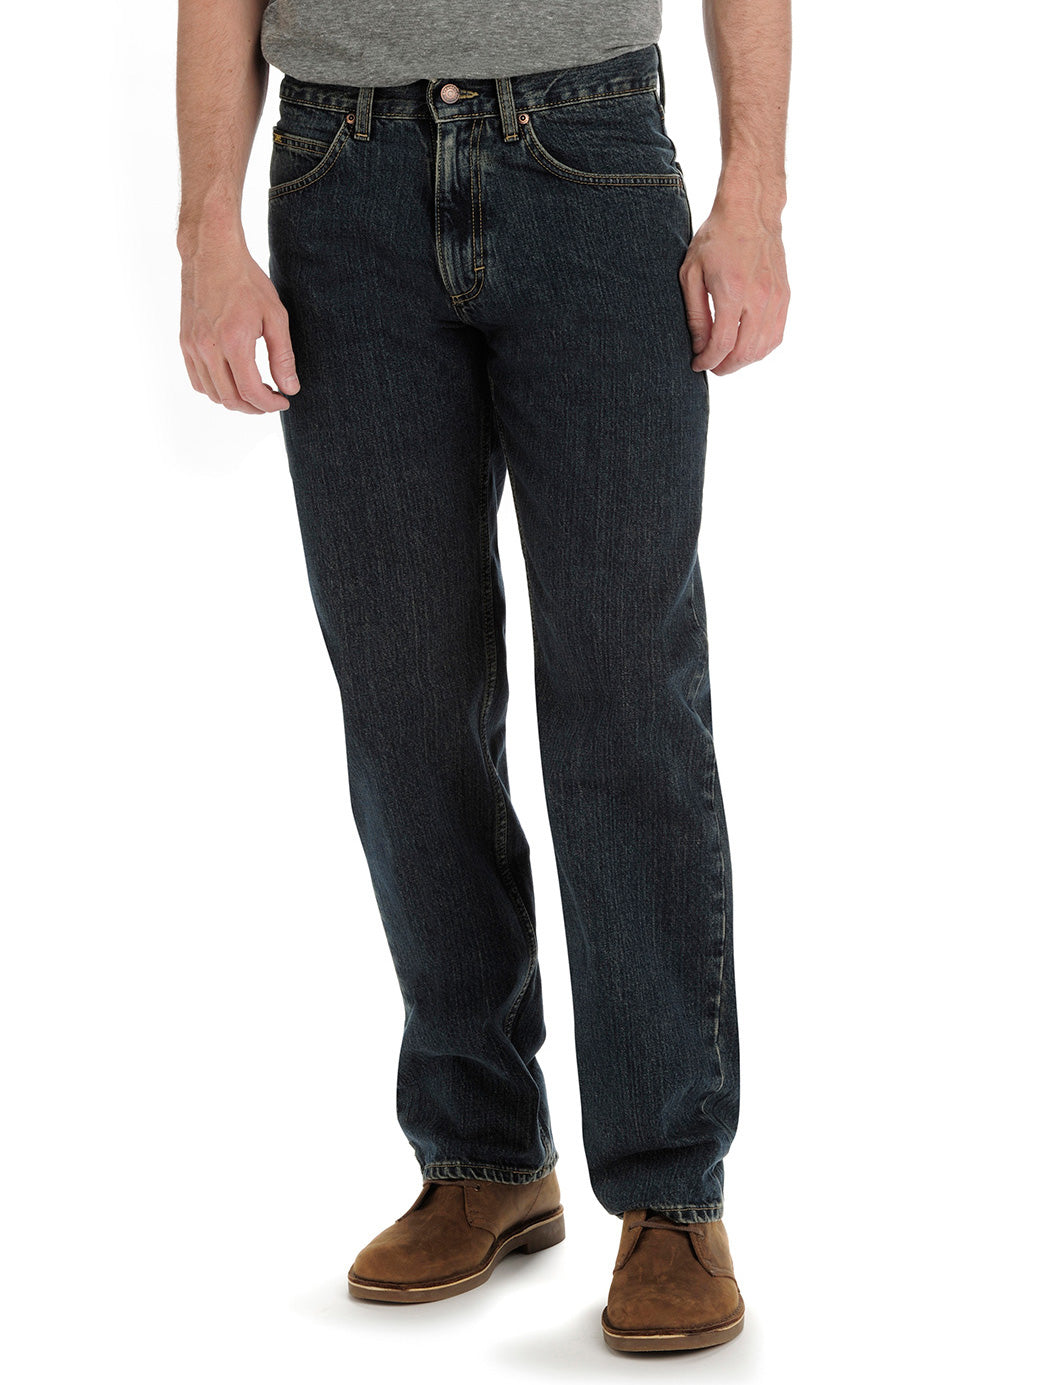 Men's Relaxed Fit Straight Leg Jeans - Tomas – EssentialApparel.com